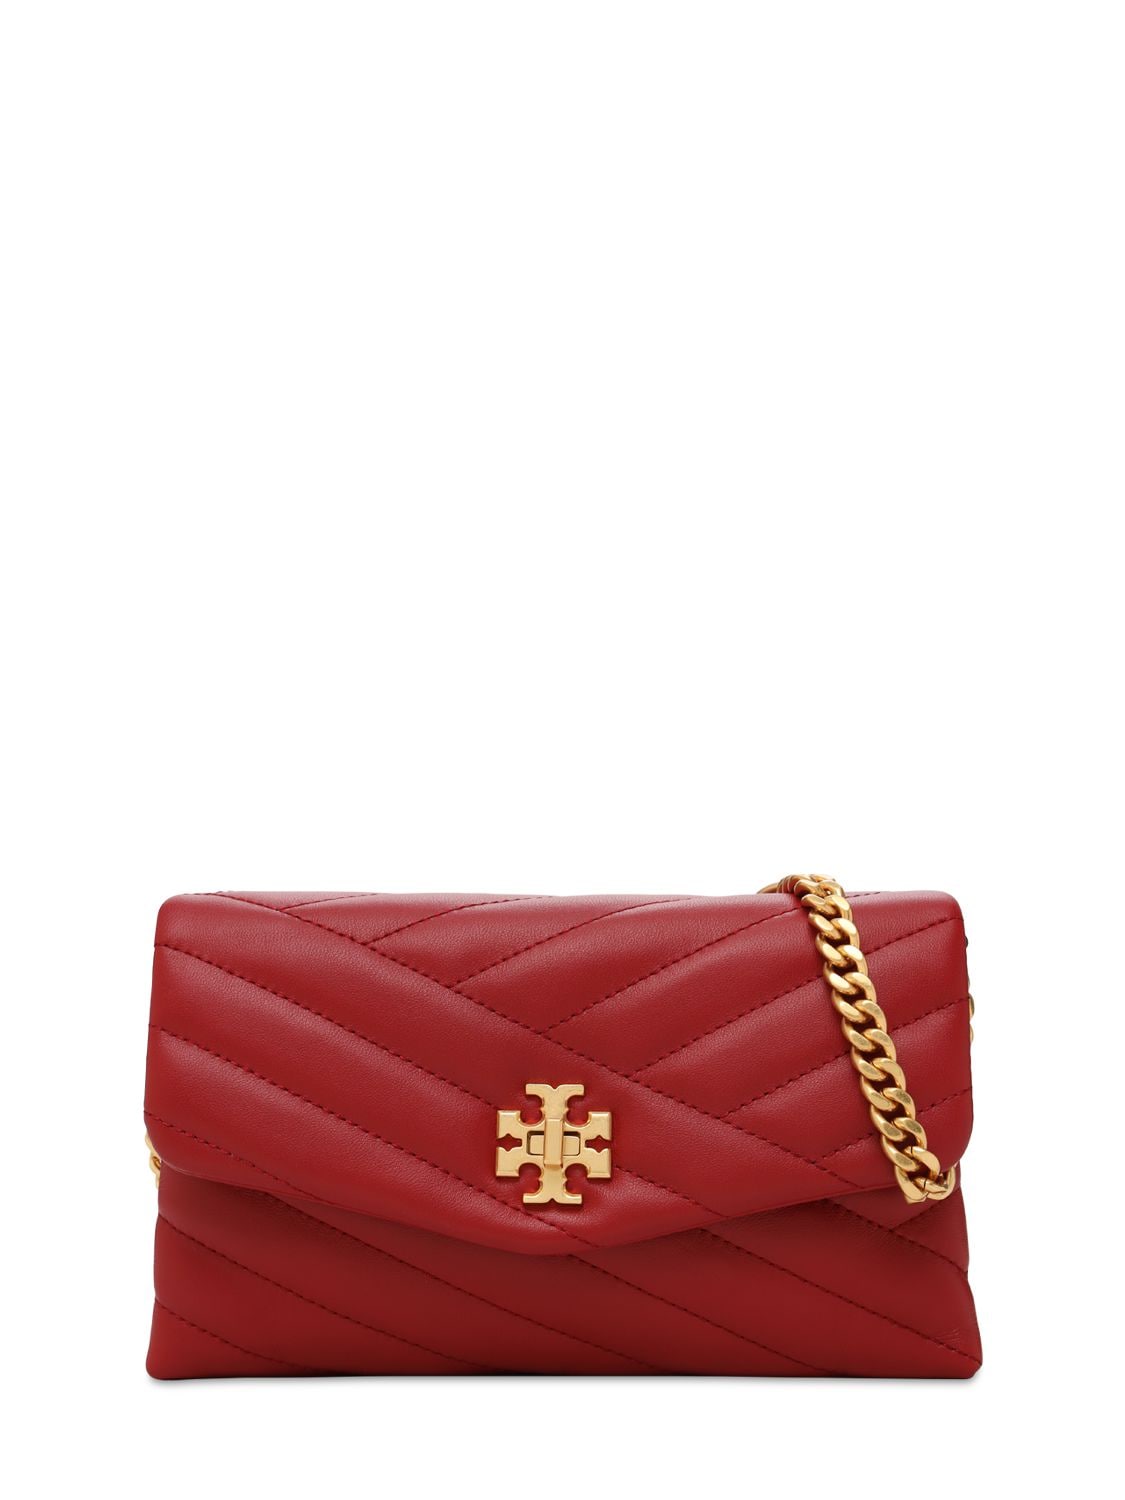 Tory Burch Kira Quilted Leather Chain Wallet Bag In Redstone